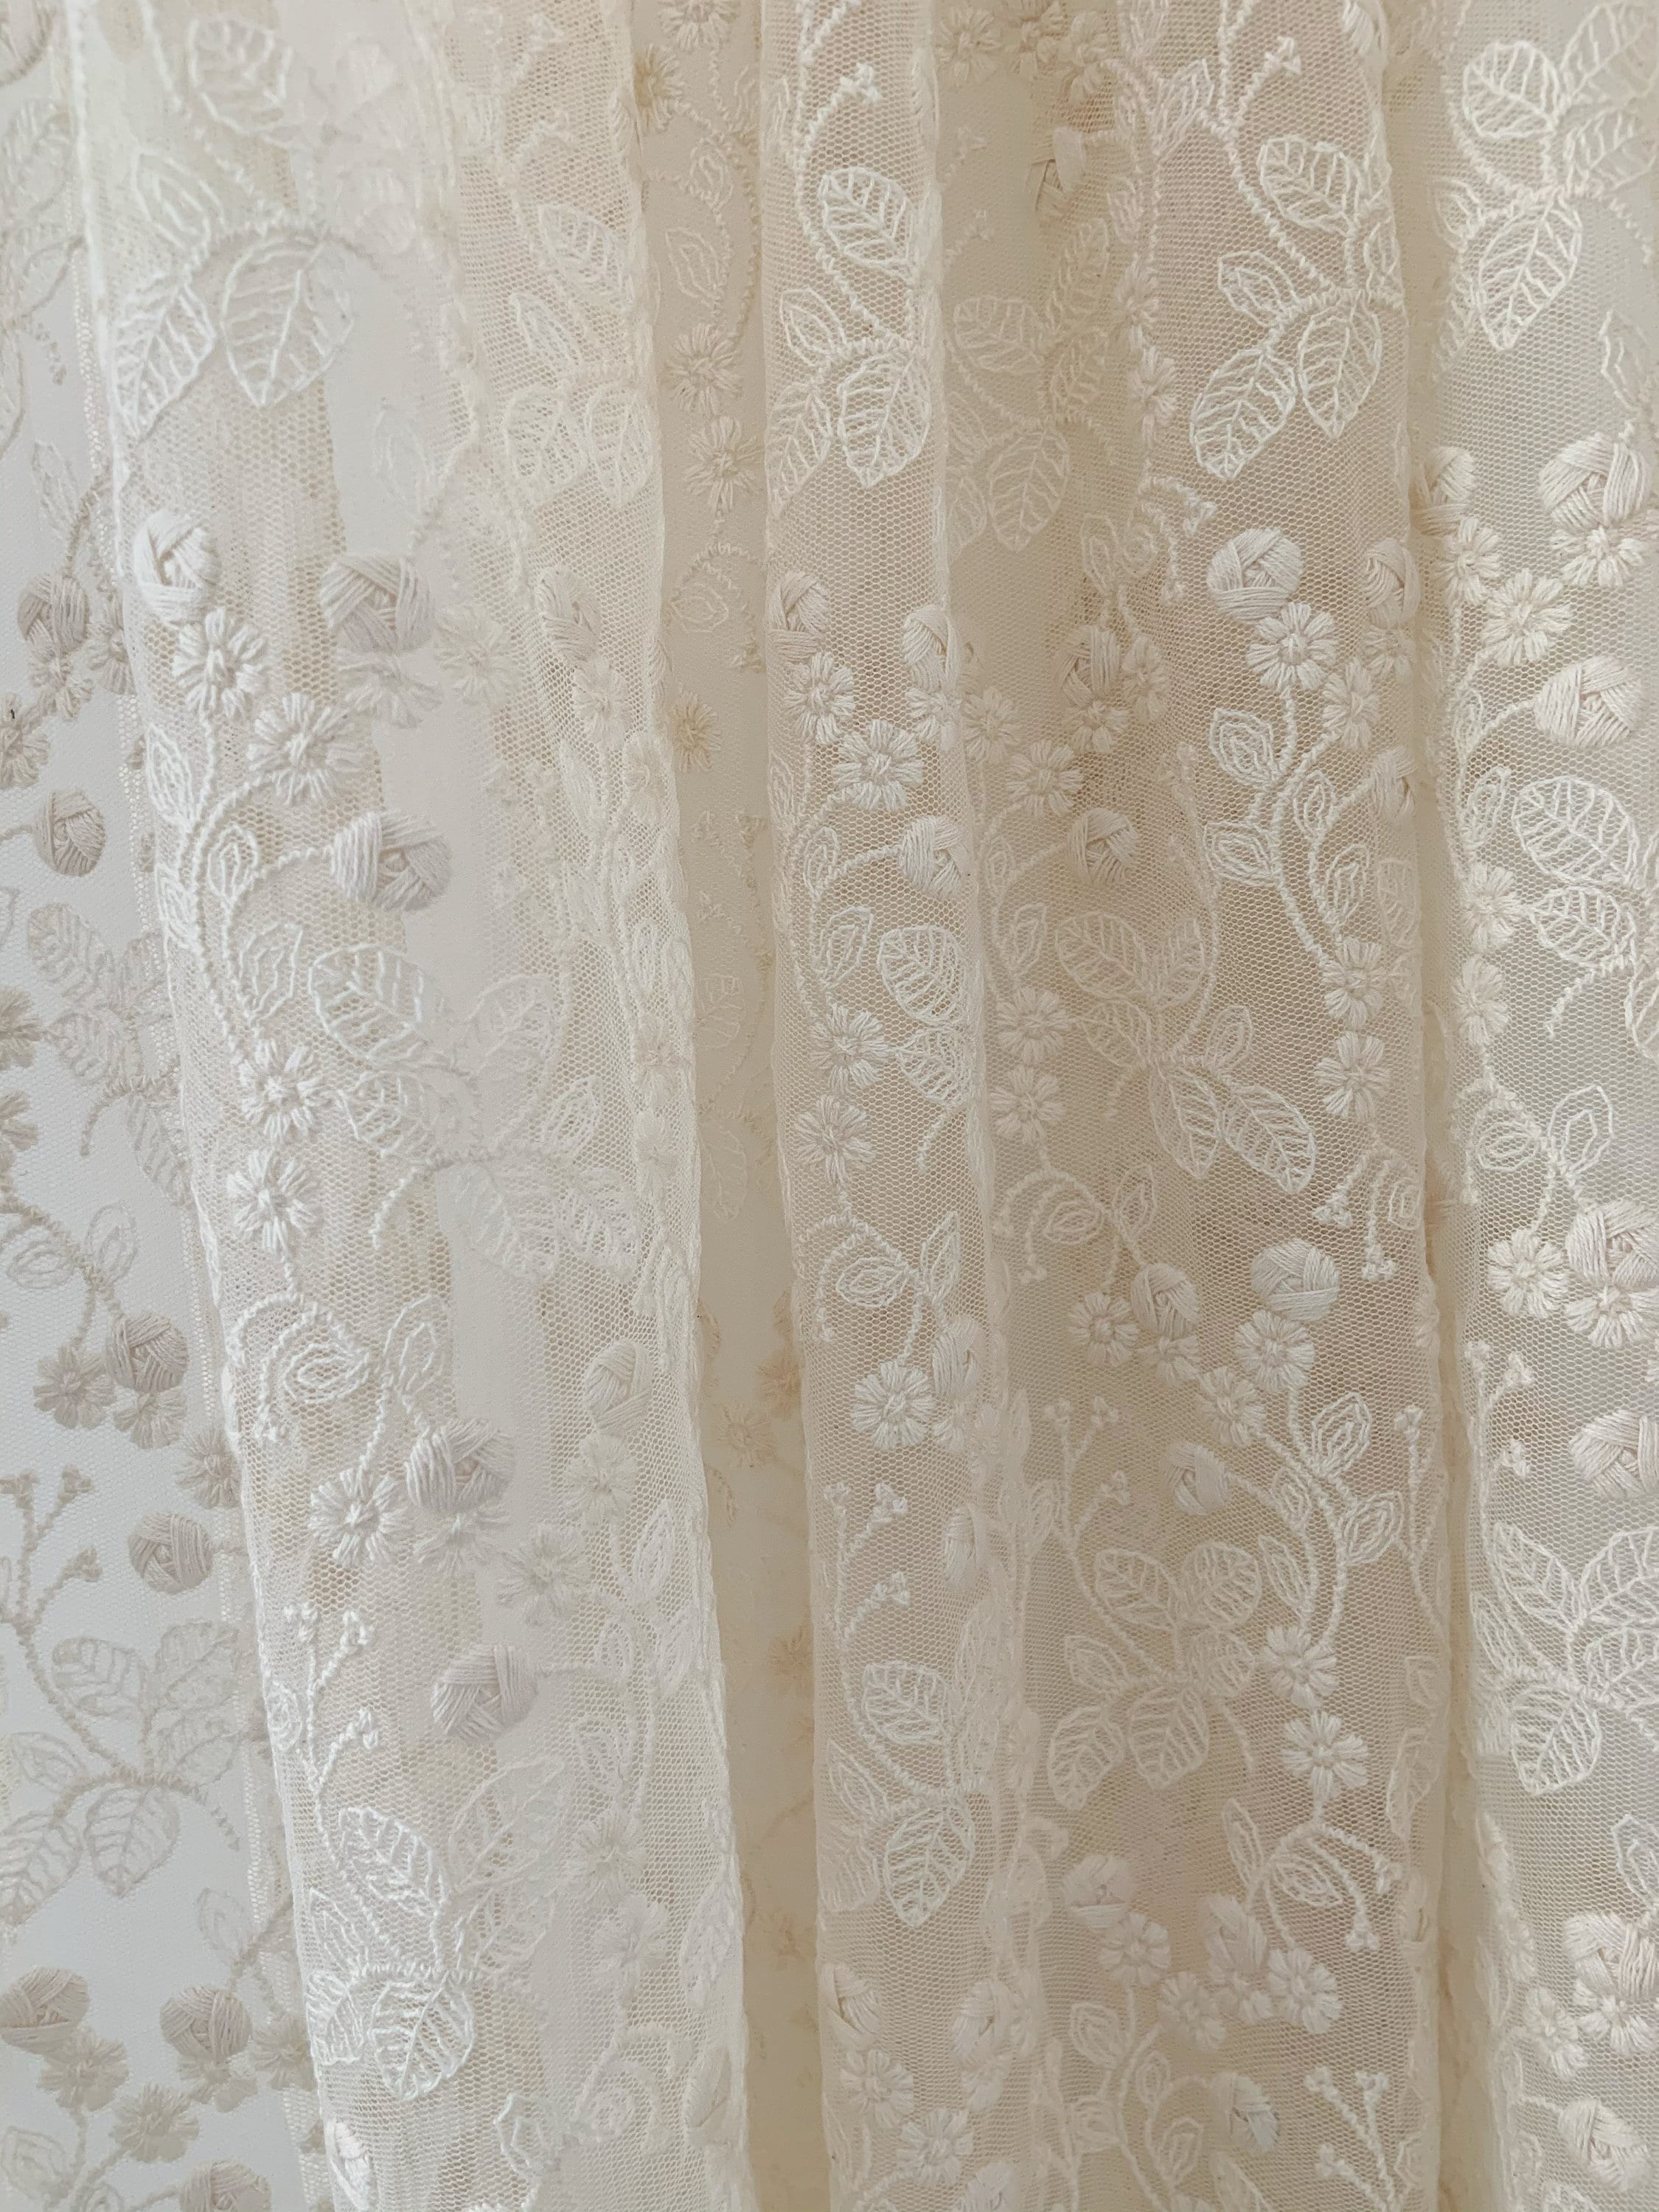 Beige Embroidered Mesh Lace Fabric by the Yard | Etsy